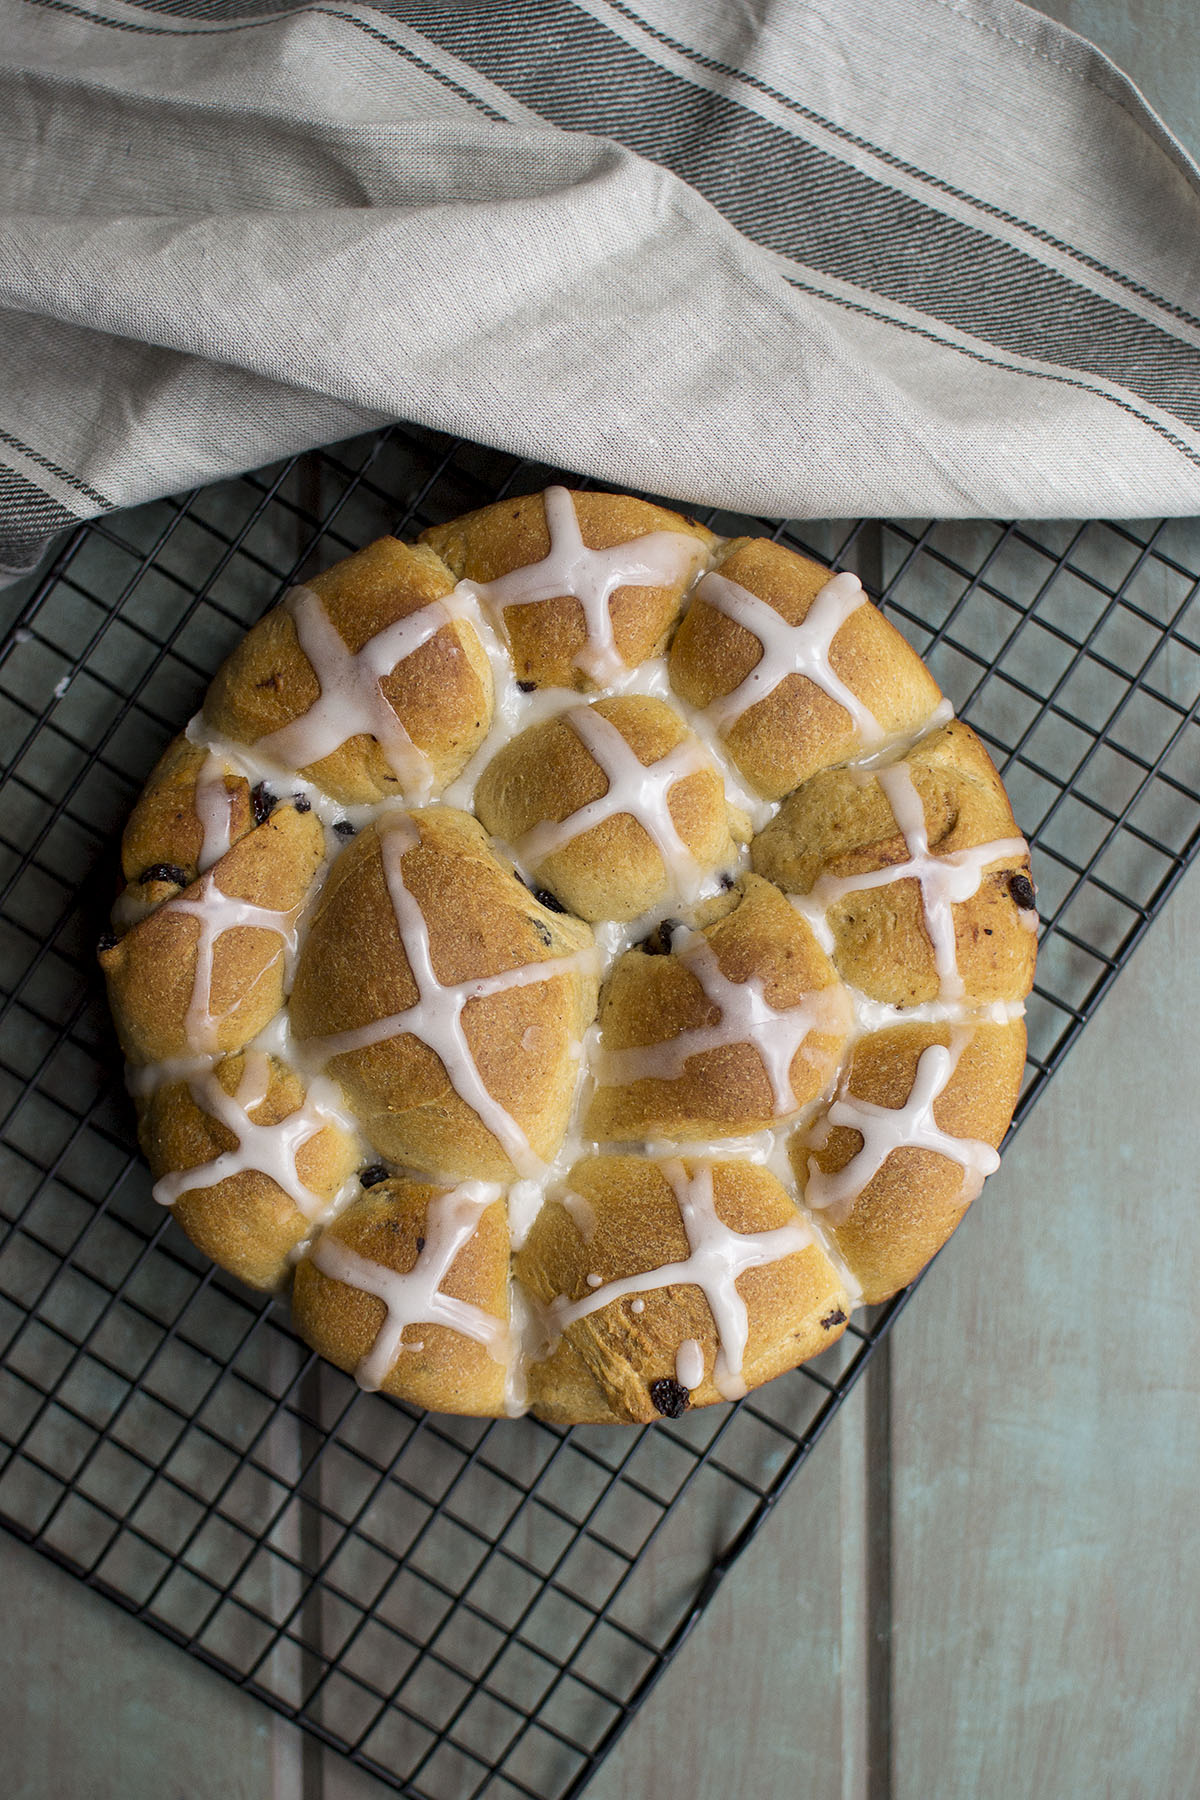 Wire rack with whole wheat hot cross buns